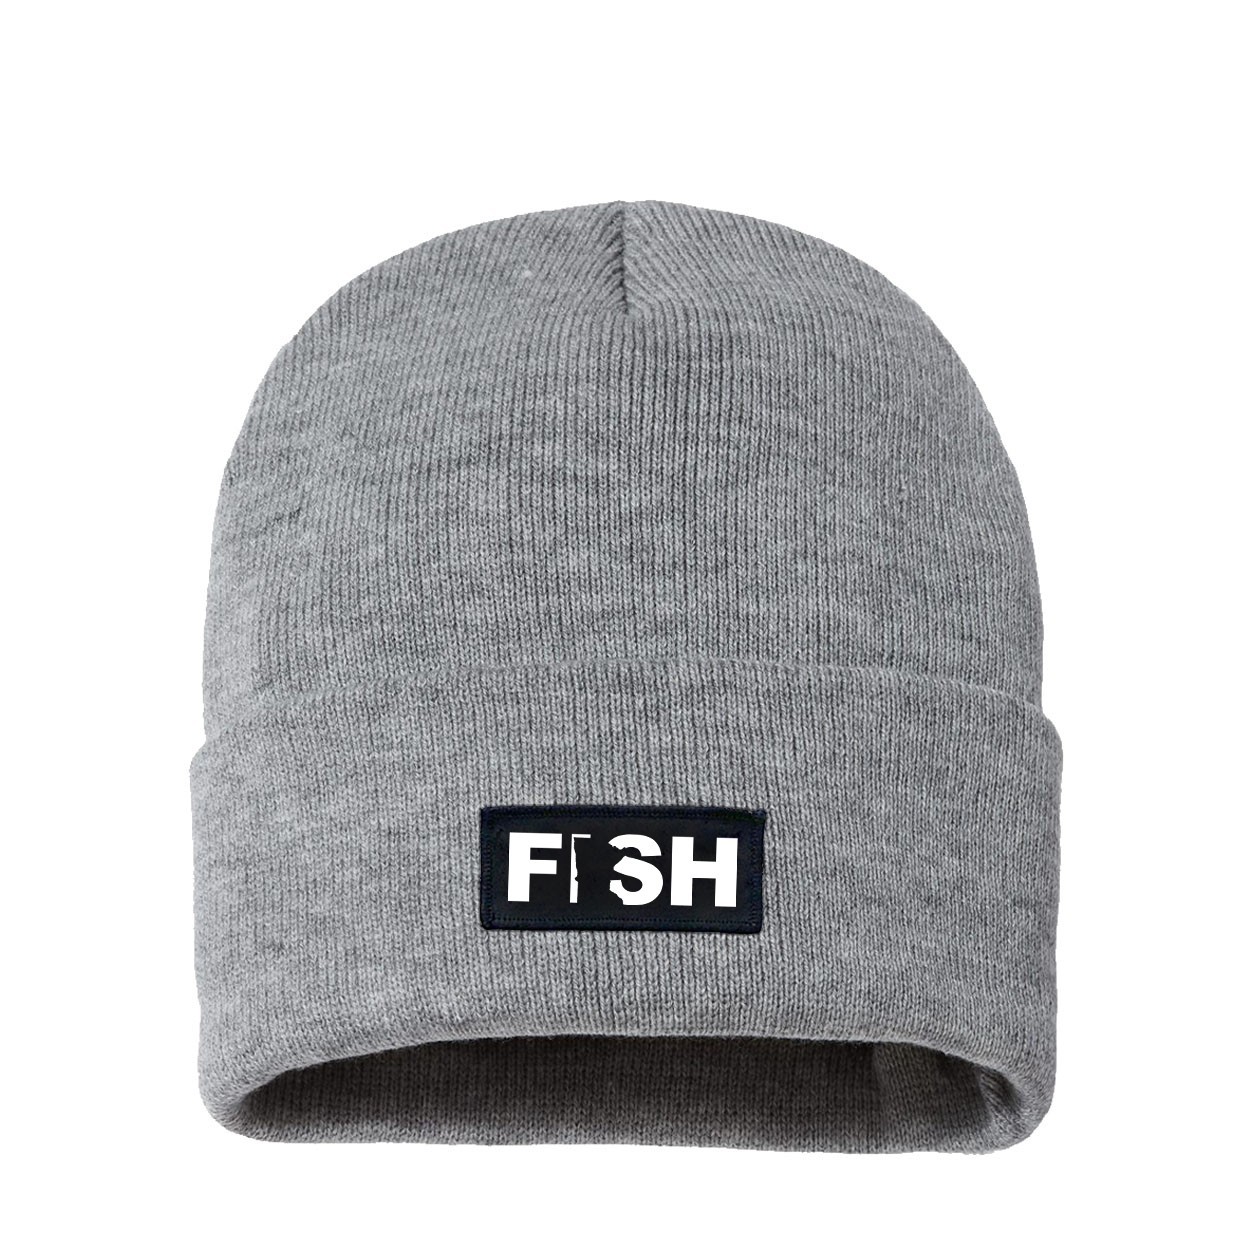 Fish Minnesota Night Out Woven Patch Night Out Sherpa Lined Cuffed Beanie Heather Gray (White Logo)